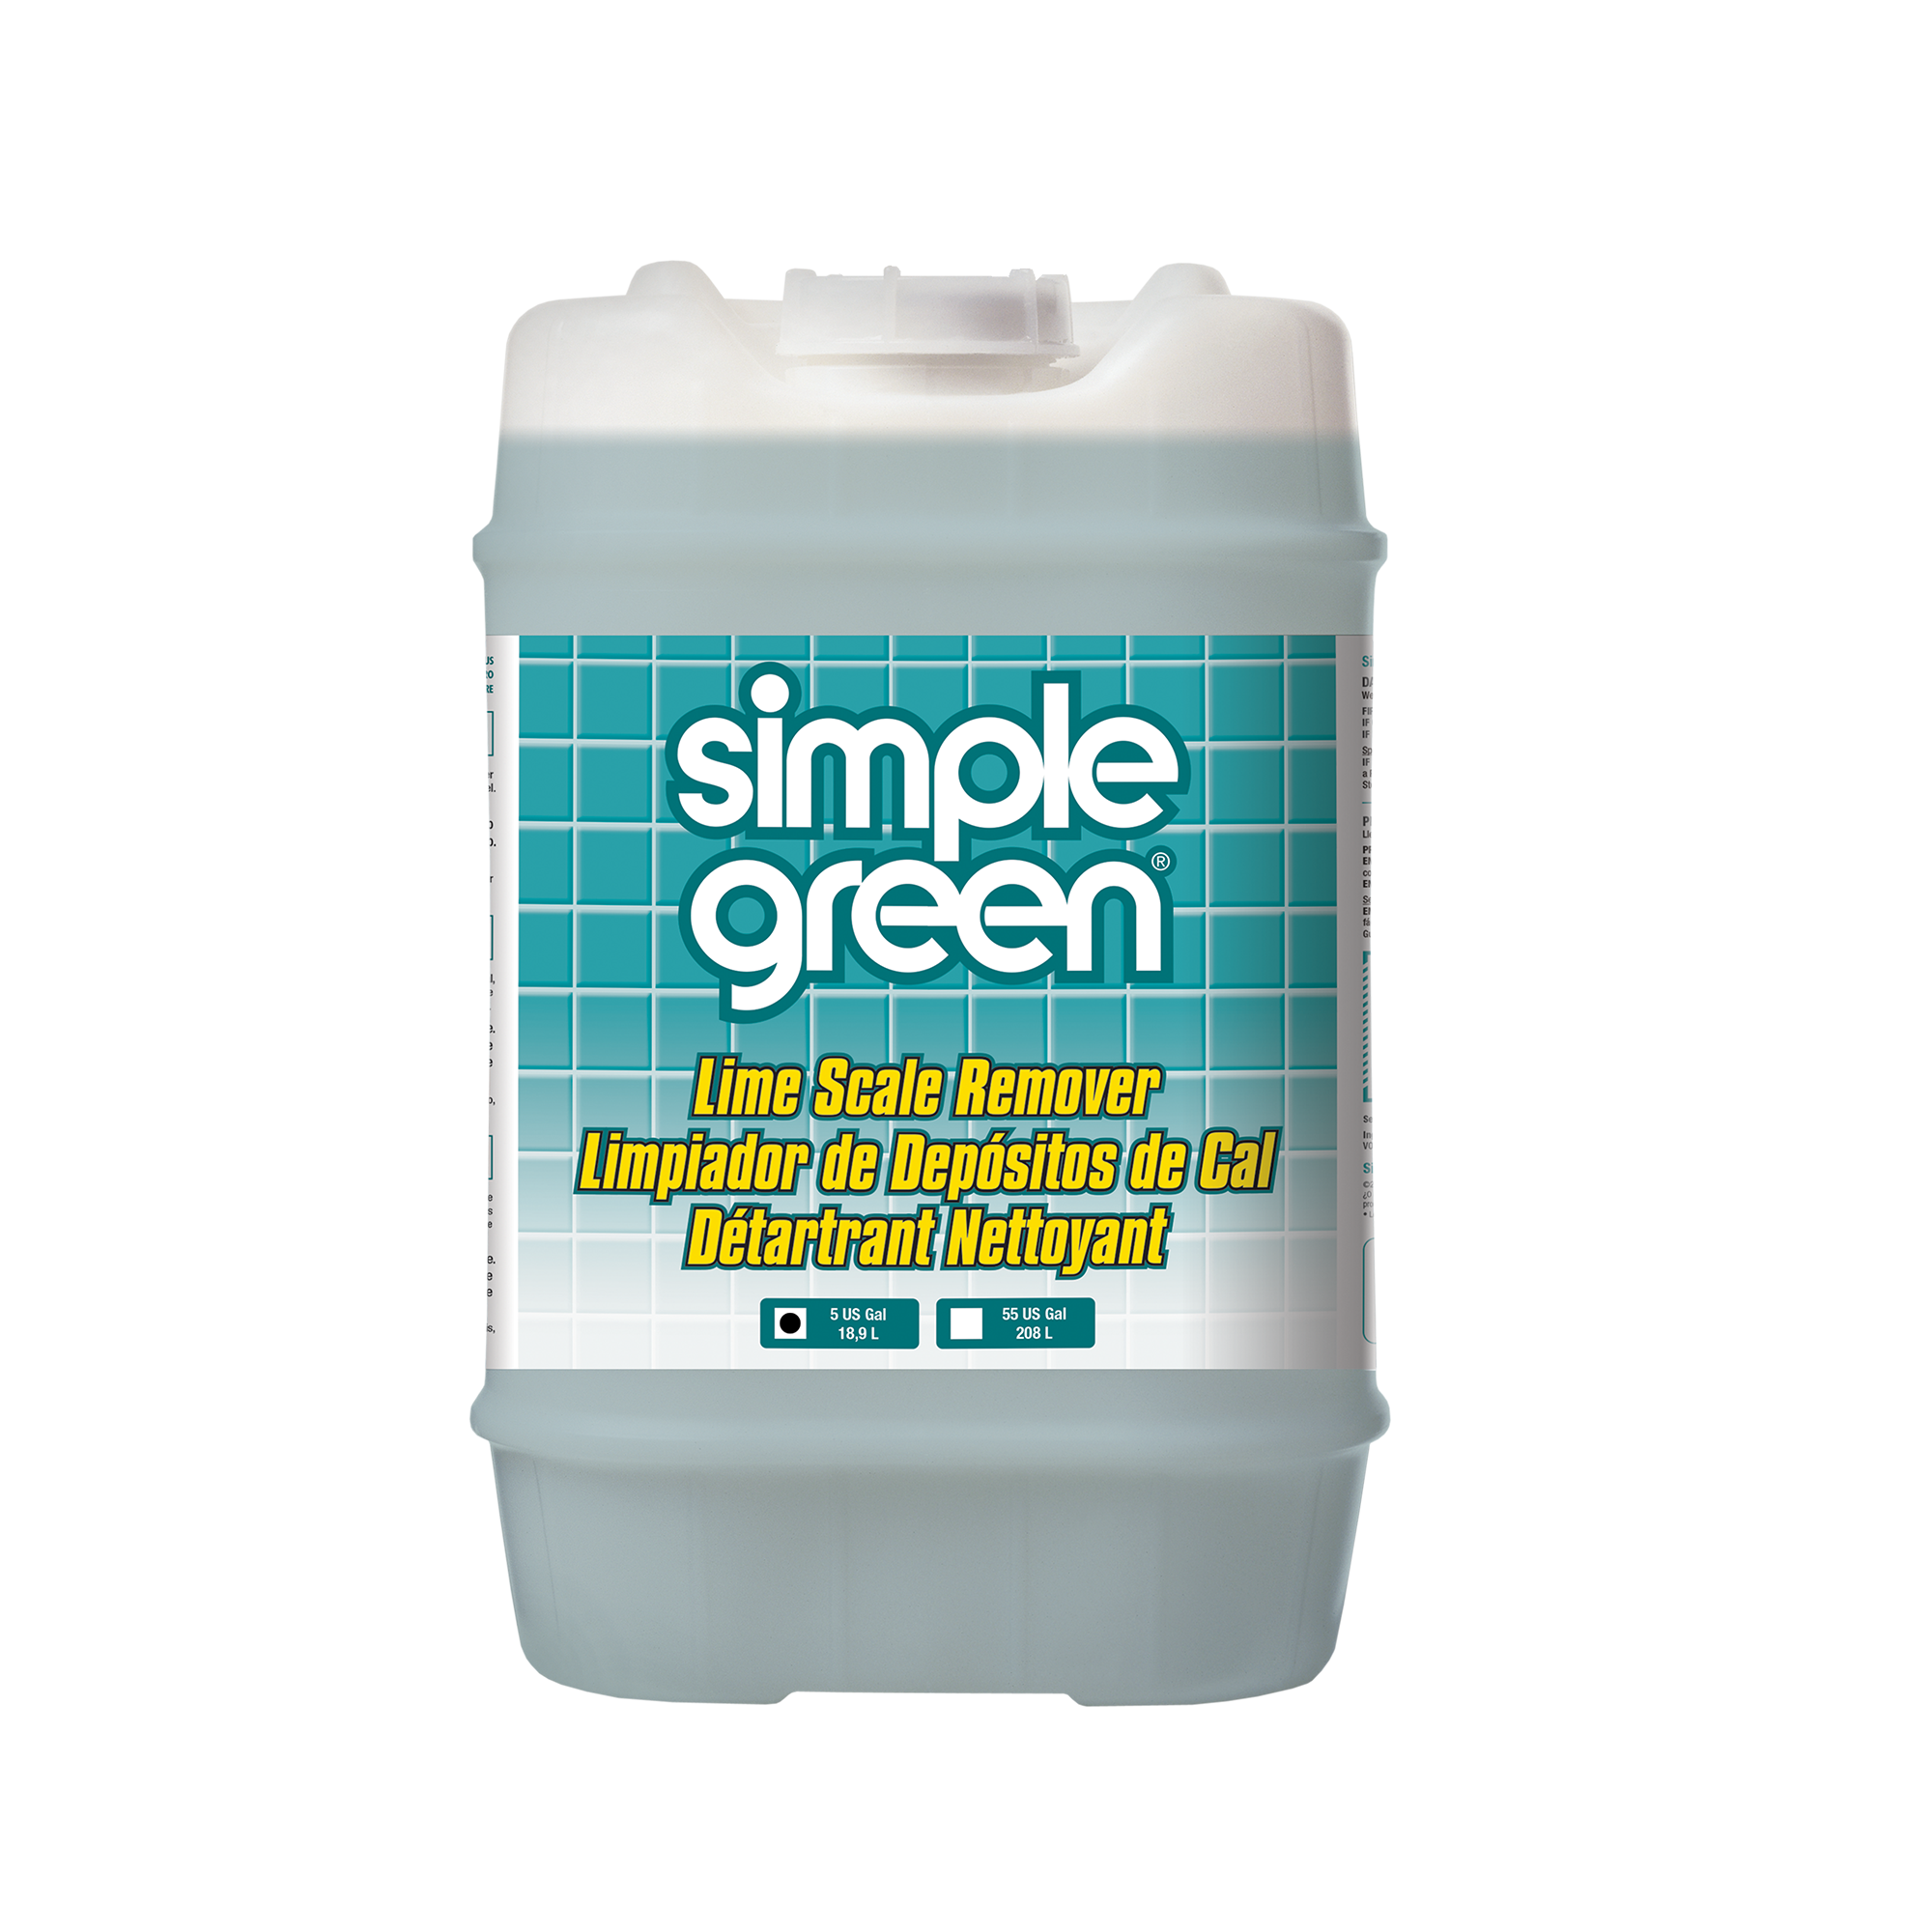 Simple Green® Lime Scale Remover